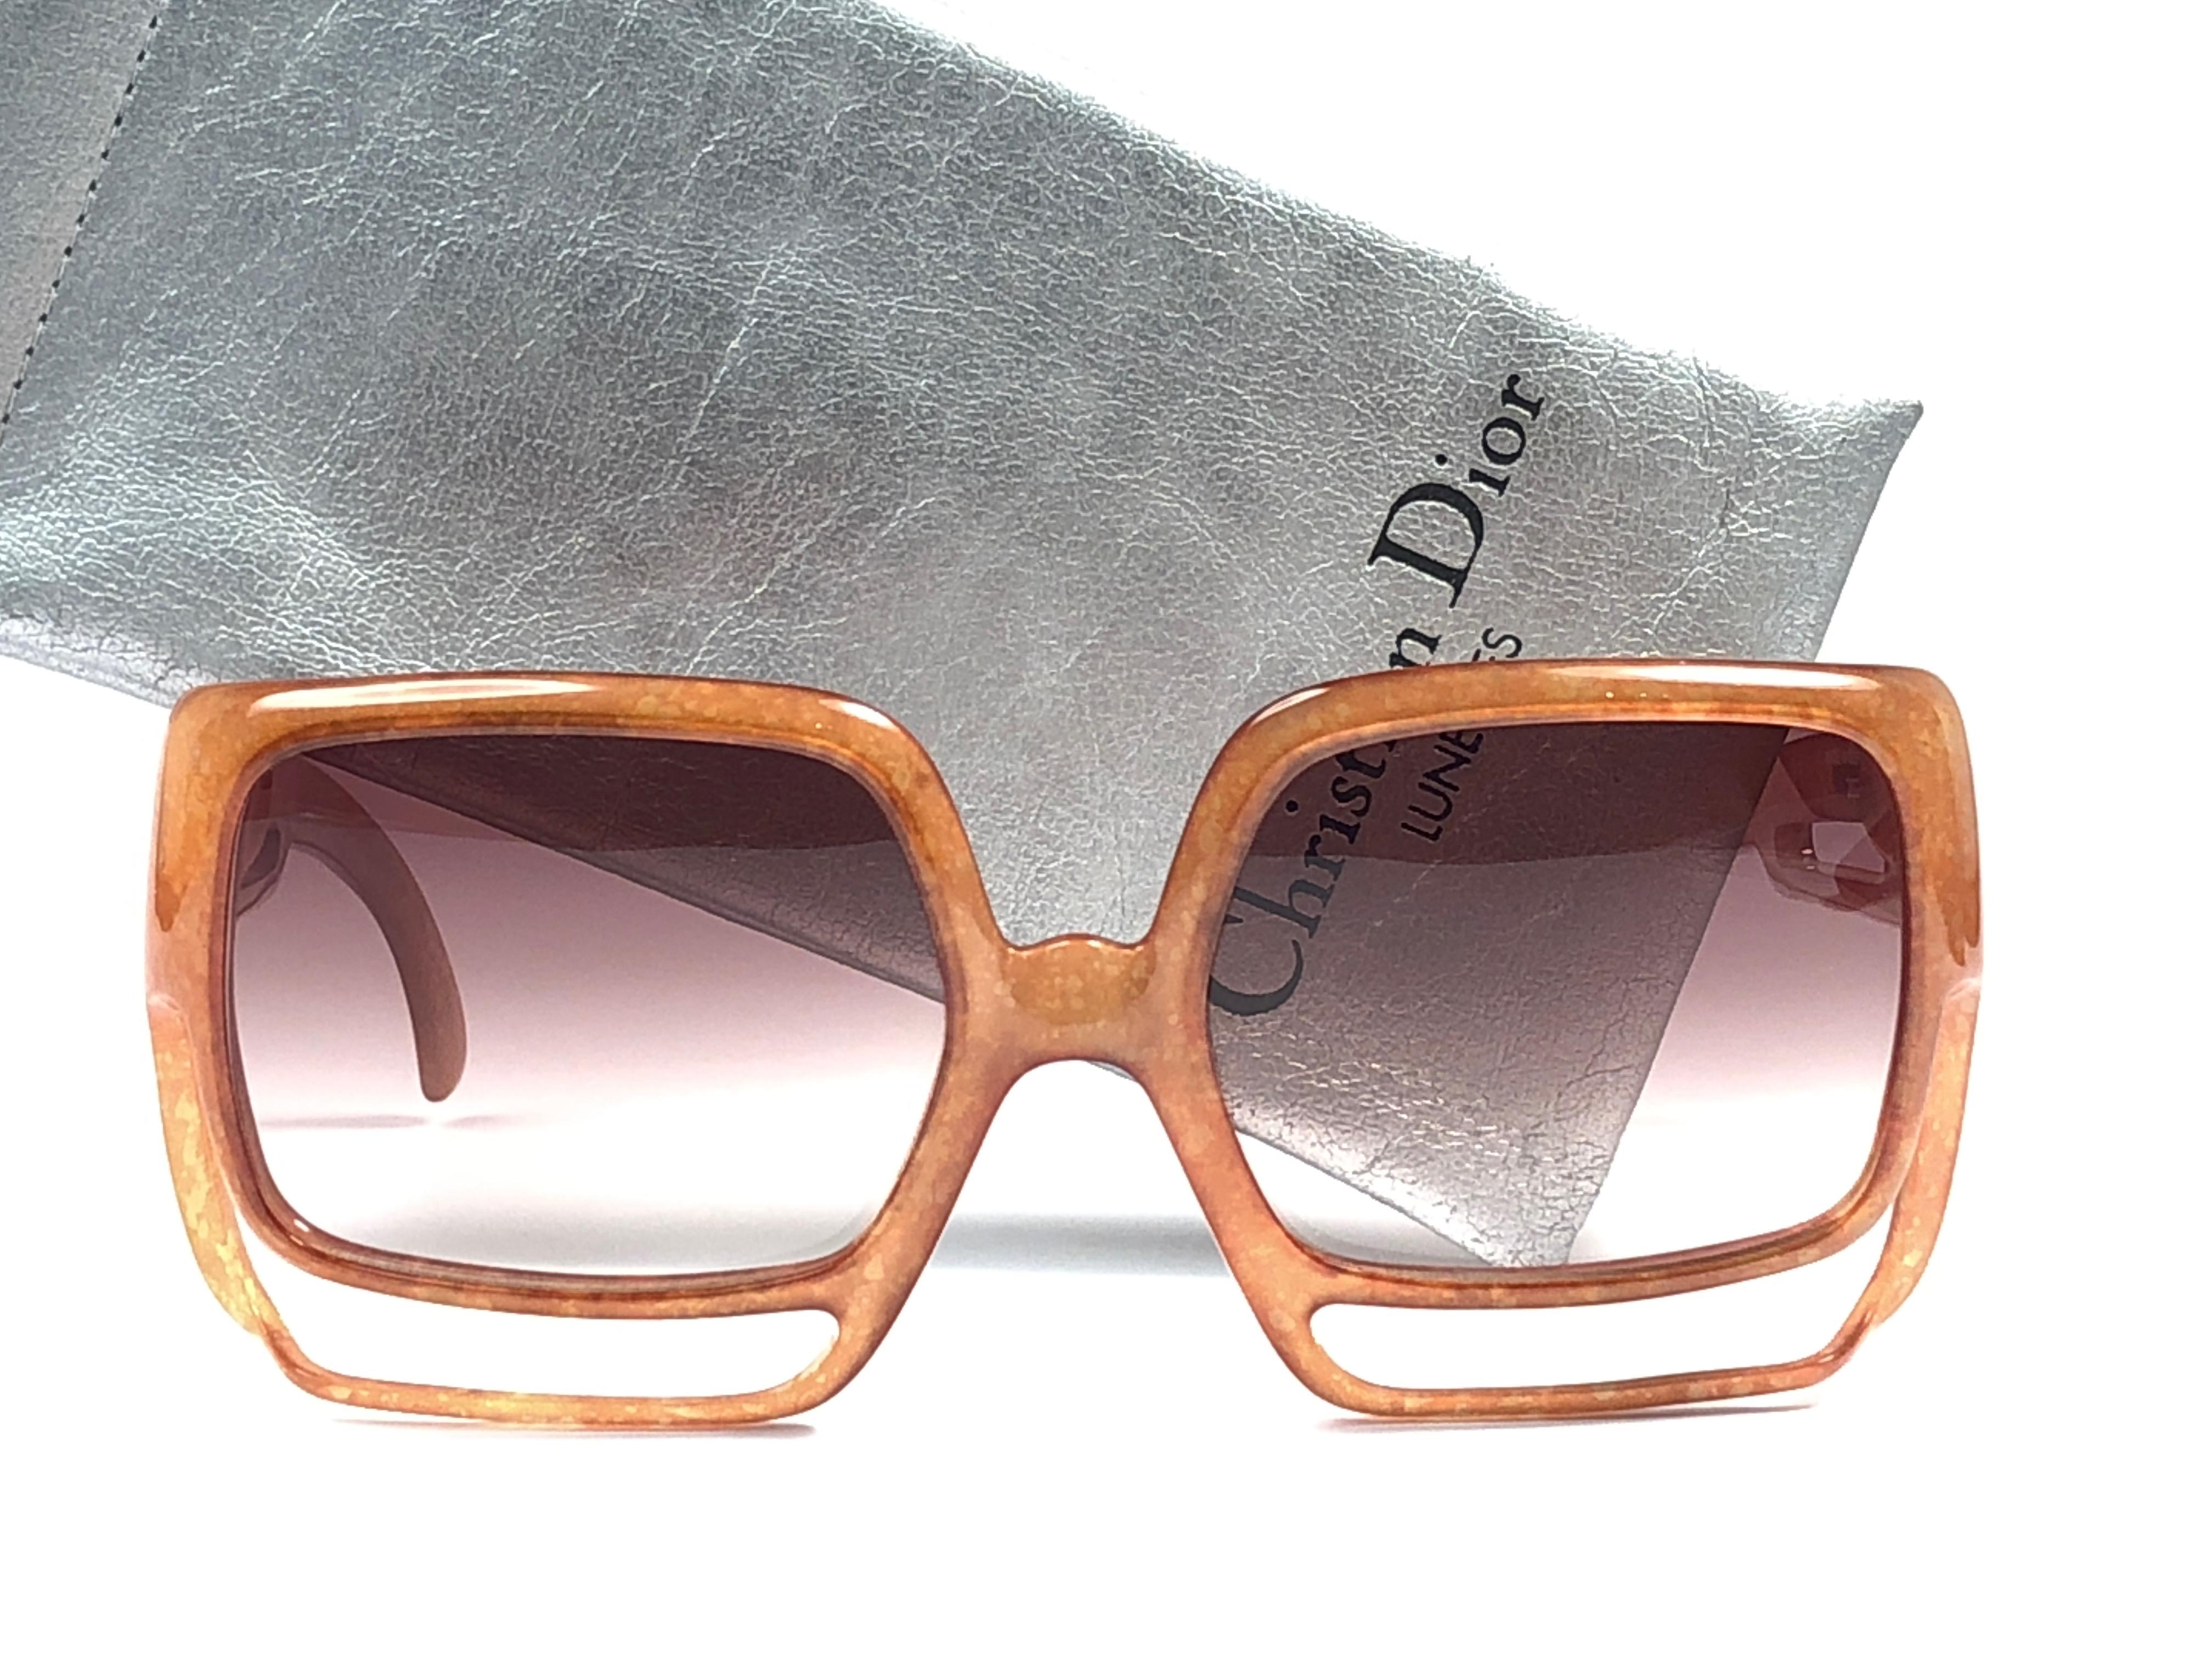 New Vintage Christian Dior 2029 30 Medium amber jasped frame sporting light gradient lenses. 

Made in Germany.
 
Produced and design in 1970's.

A collector’s piece!

New, never worn or displayed. Comes with its original silver Christian Dior